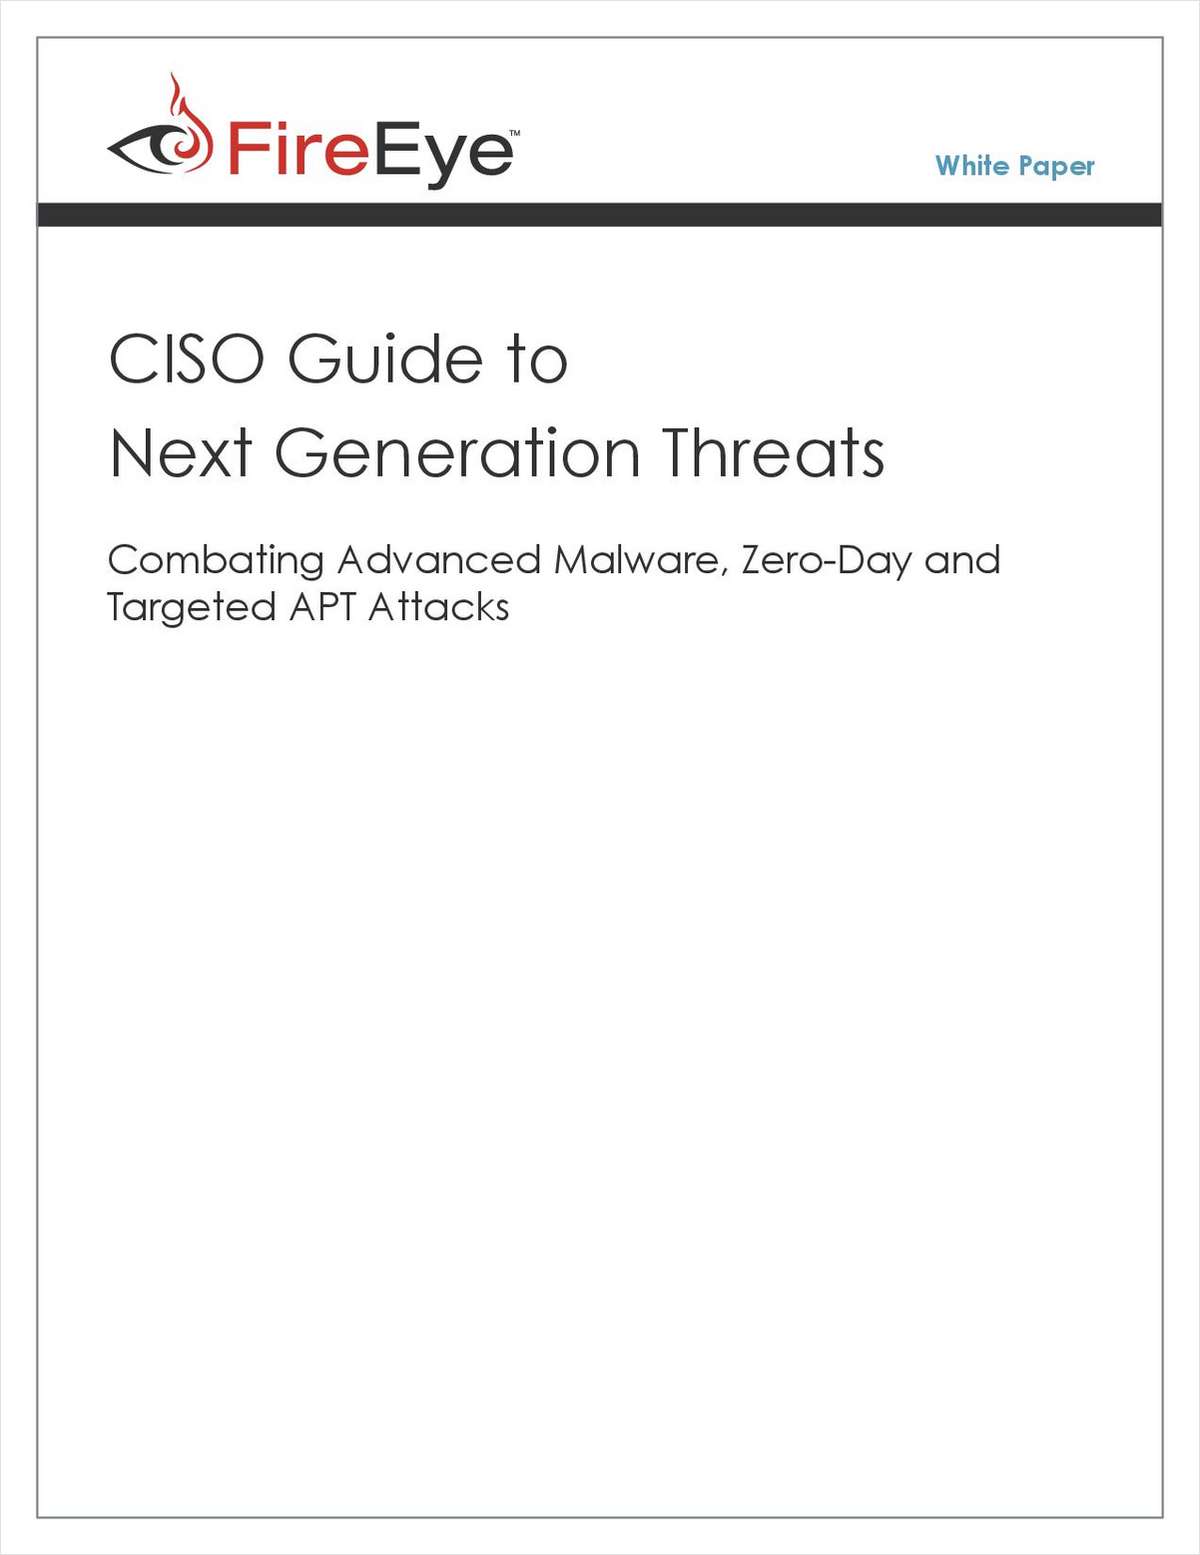 CISO Guide to Next Generation Threats